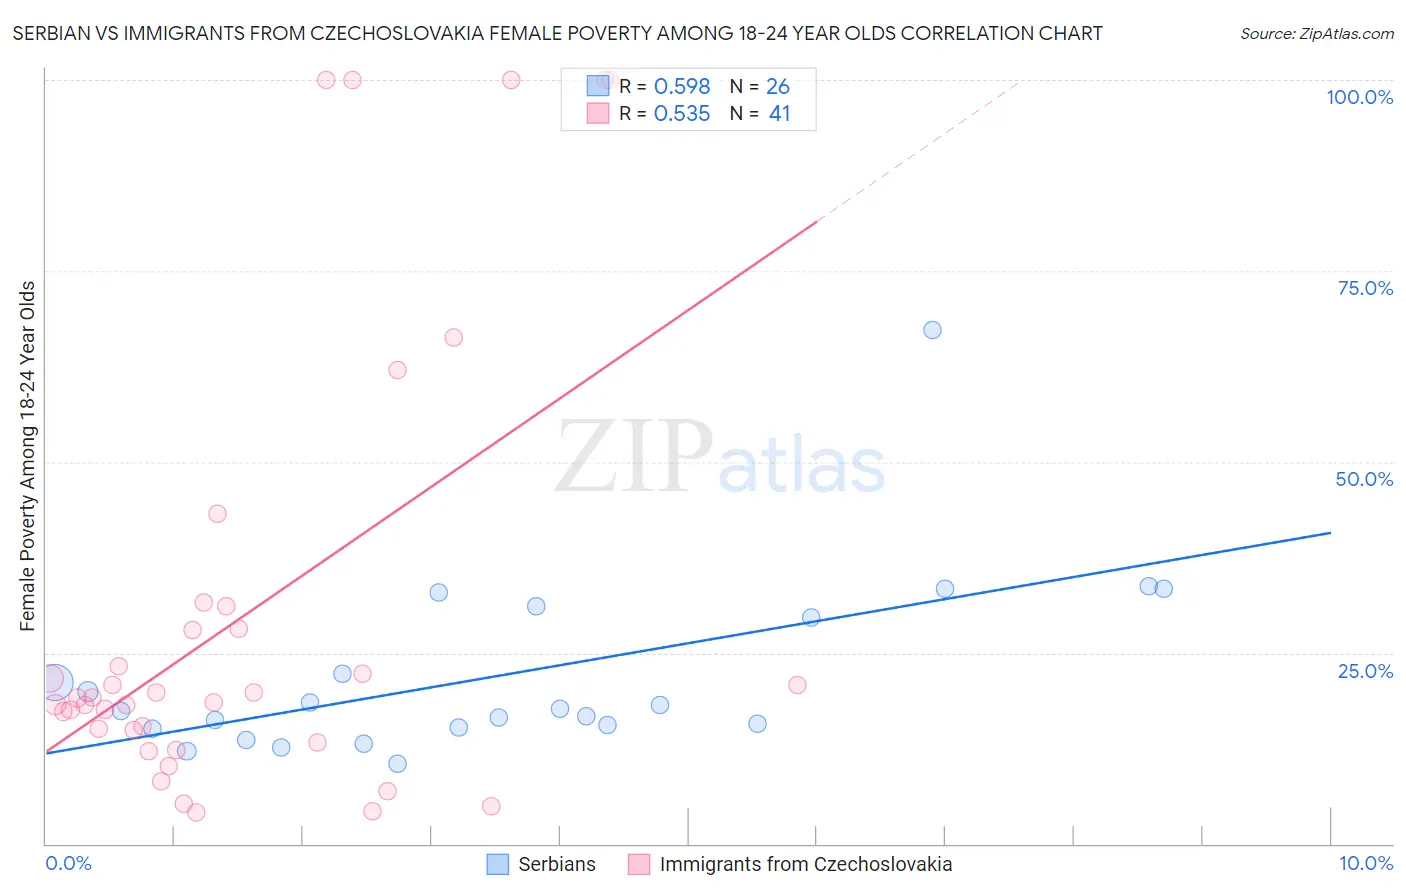 Serbian vs Immigrants from Czechoslovakia Female Poverty Among 18-24 Year Olds